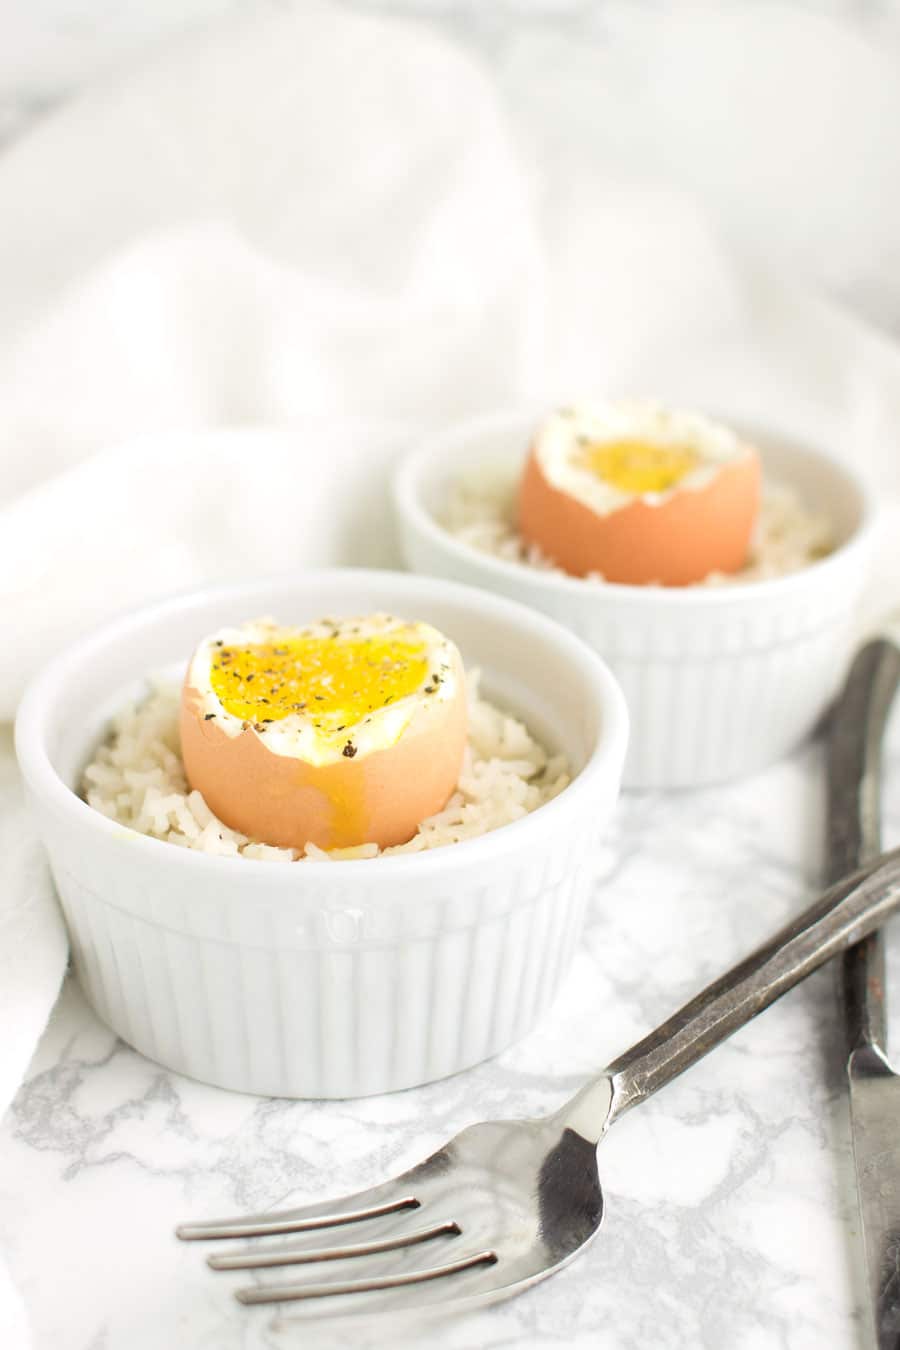 Soft-Boiled Eggs recipe from acleanplate.com #paleo #recipe #healthy